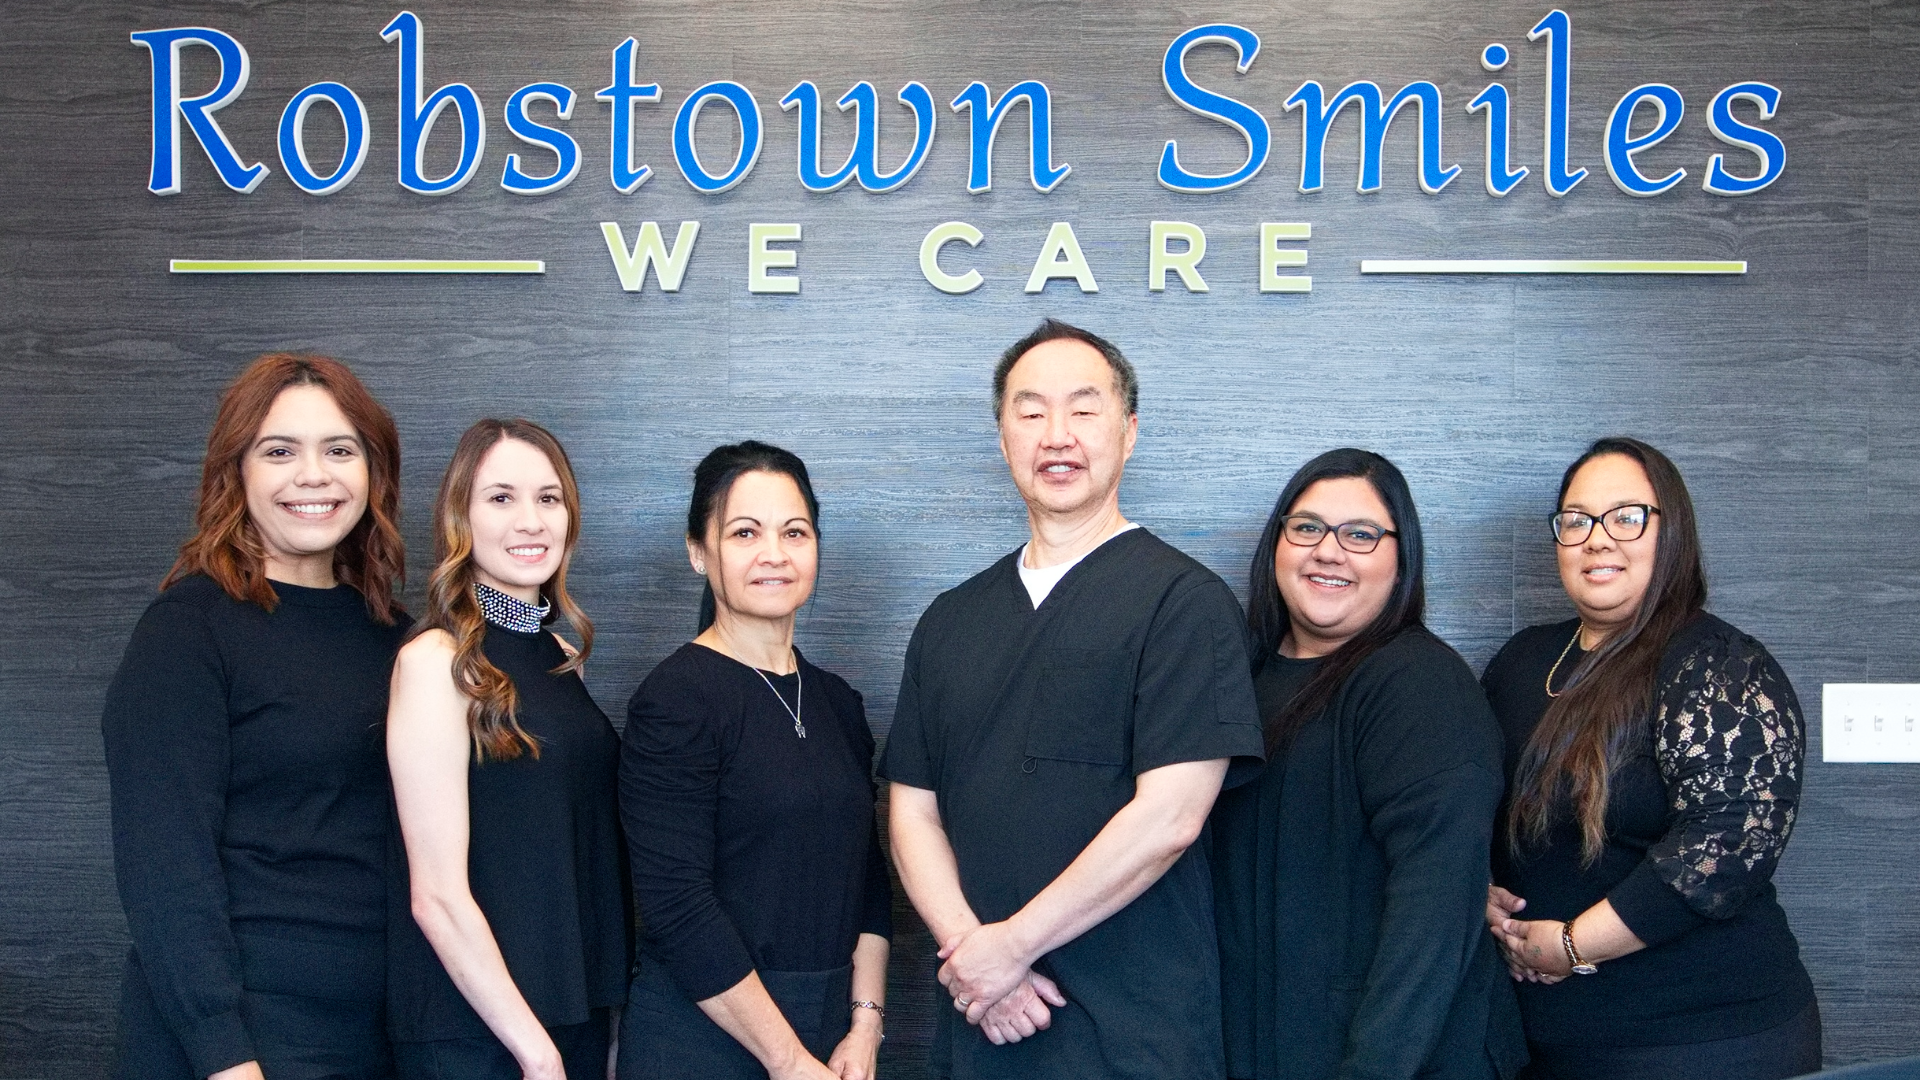 Robstown Smiles - Dentist in Robstown, TX 222 E Main Ave, Robstown Texas 78380